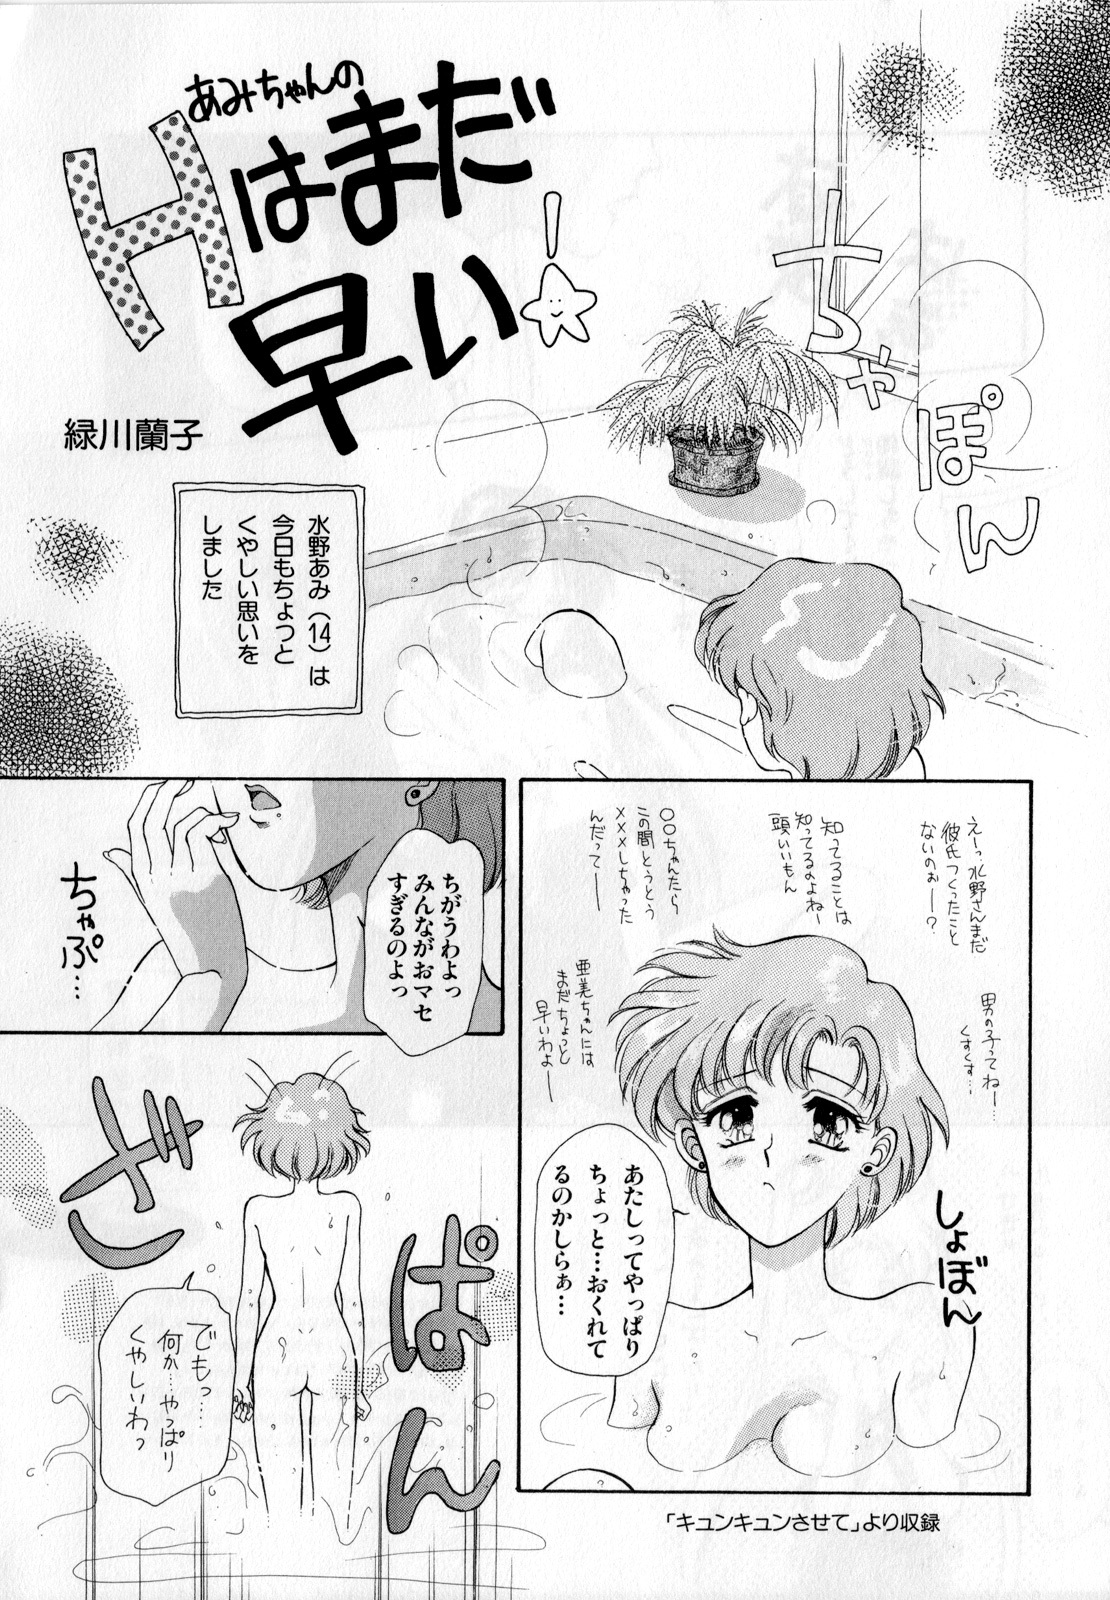 [Anthology] Lunatic Party 1 (Sailor Moon) page 19 full